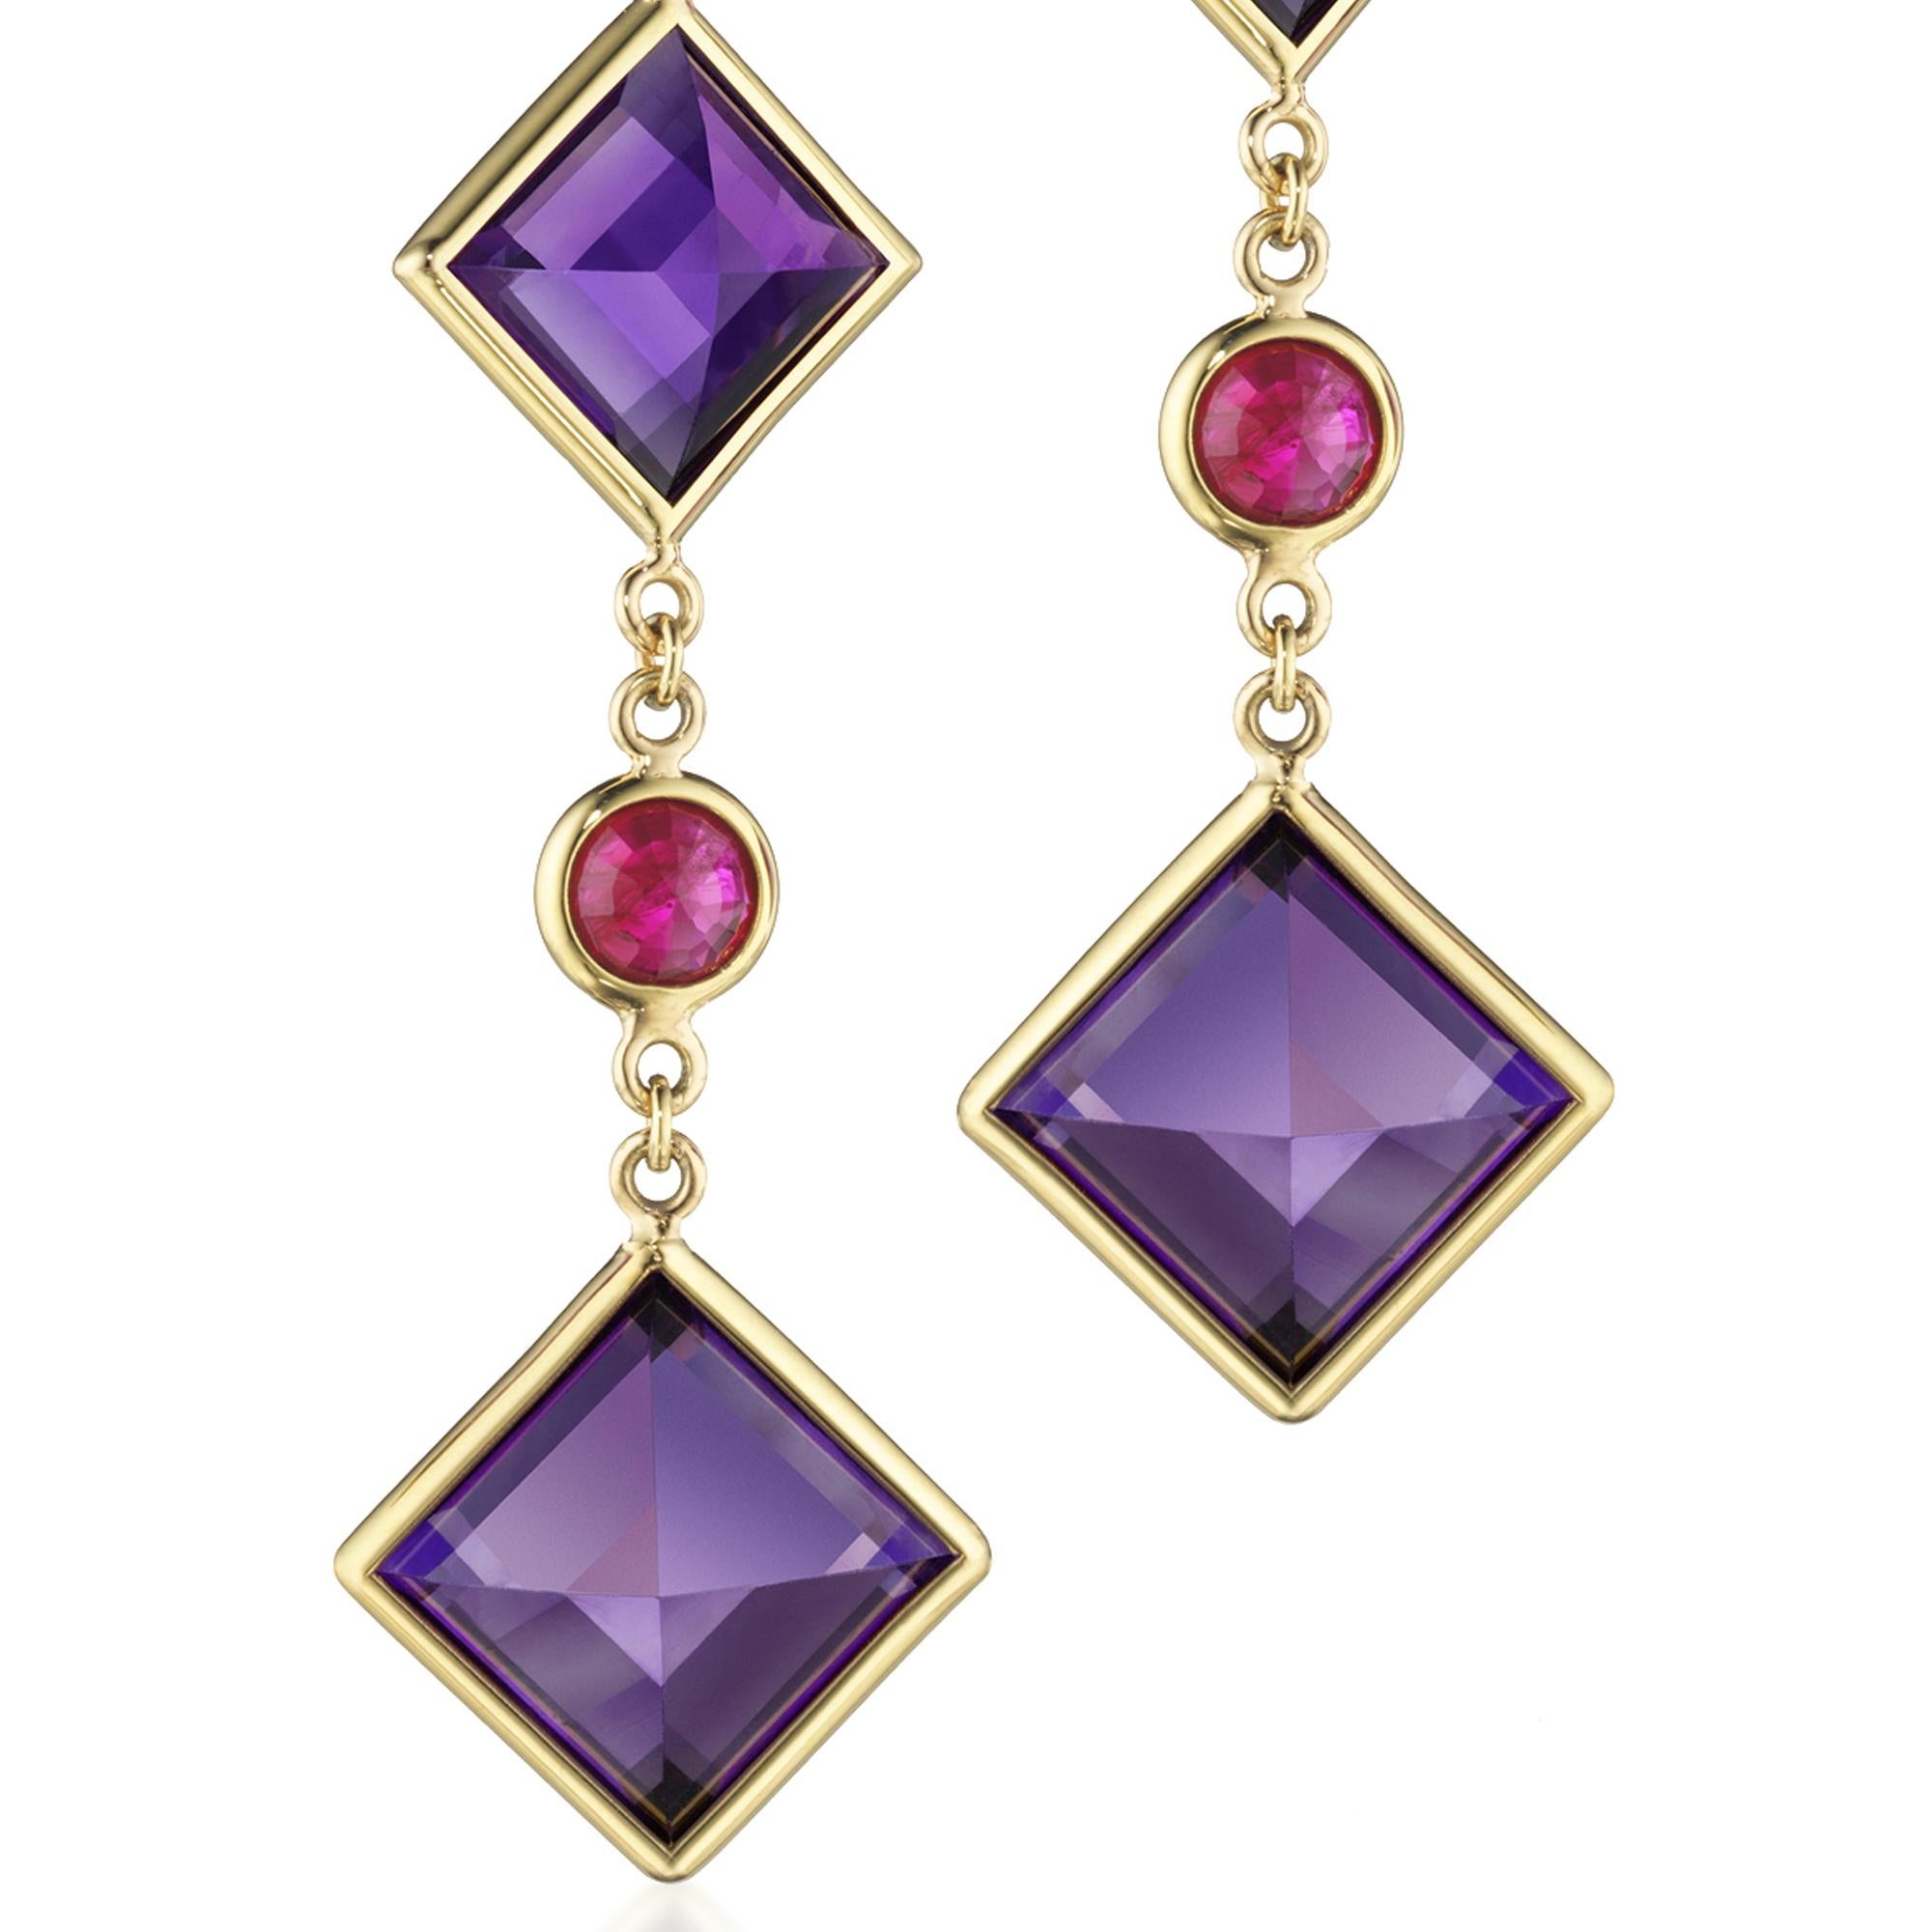 Emerald Cut Paolo Costagli 18 Karat Yellow Gold Amethyst and Ruby Florentine Earrings For Sale